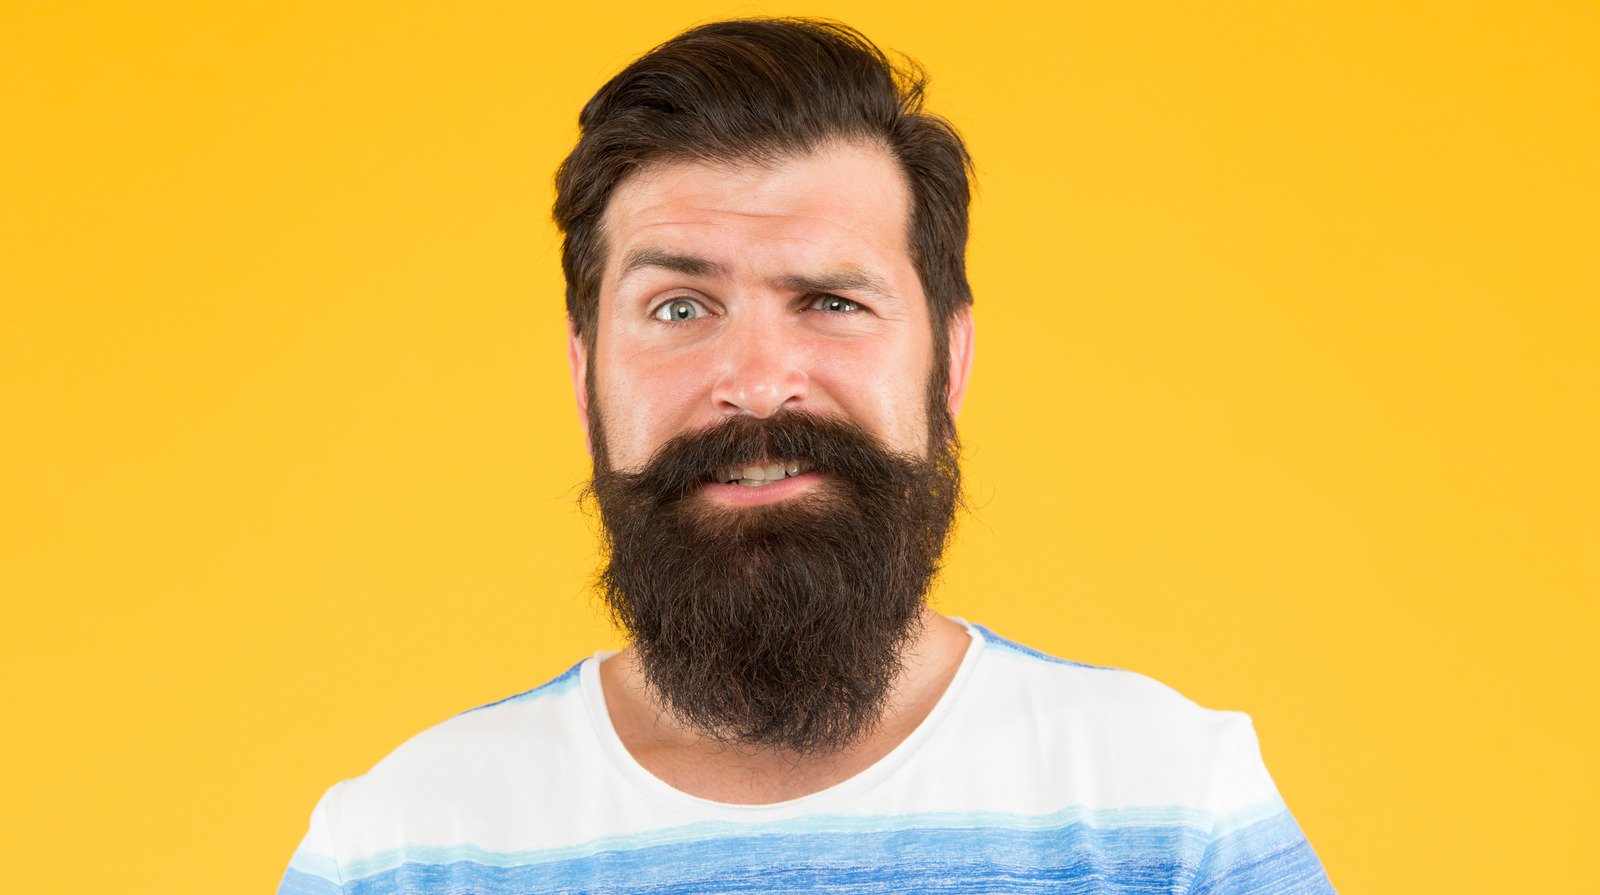 When You Don't Wash Your Beard, This Is What Happens - Health Digest